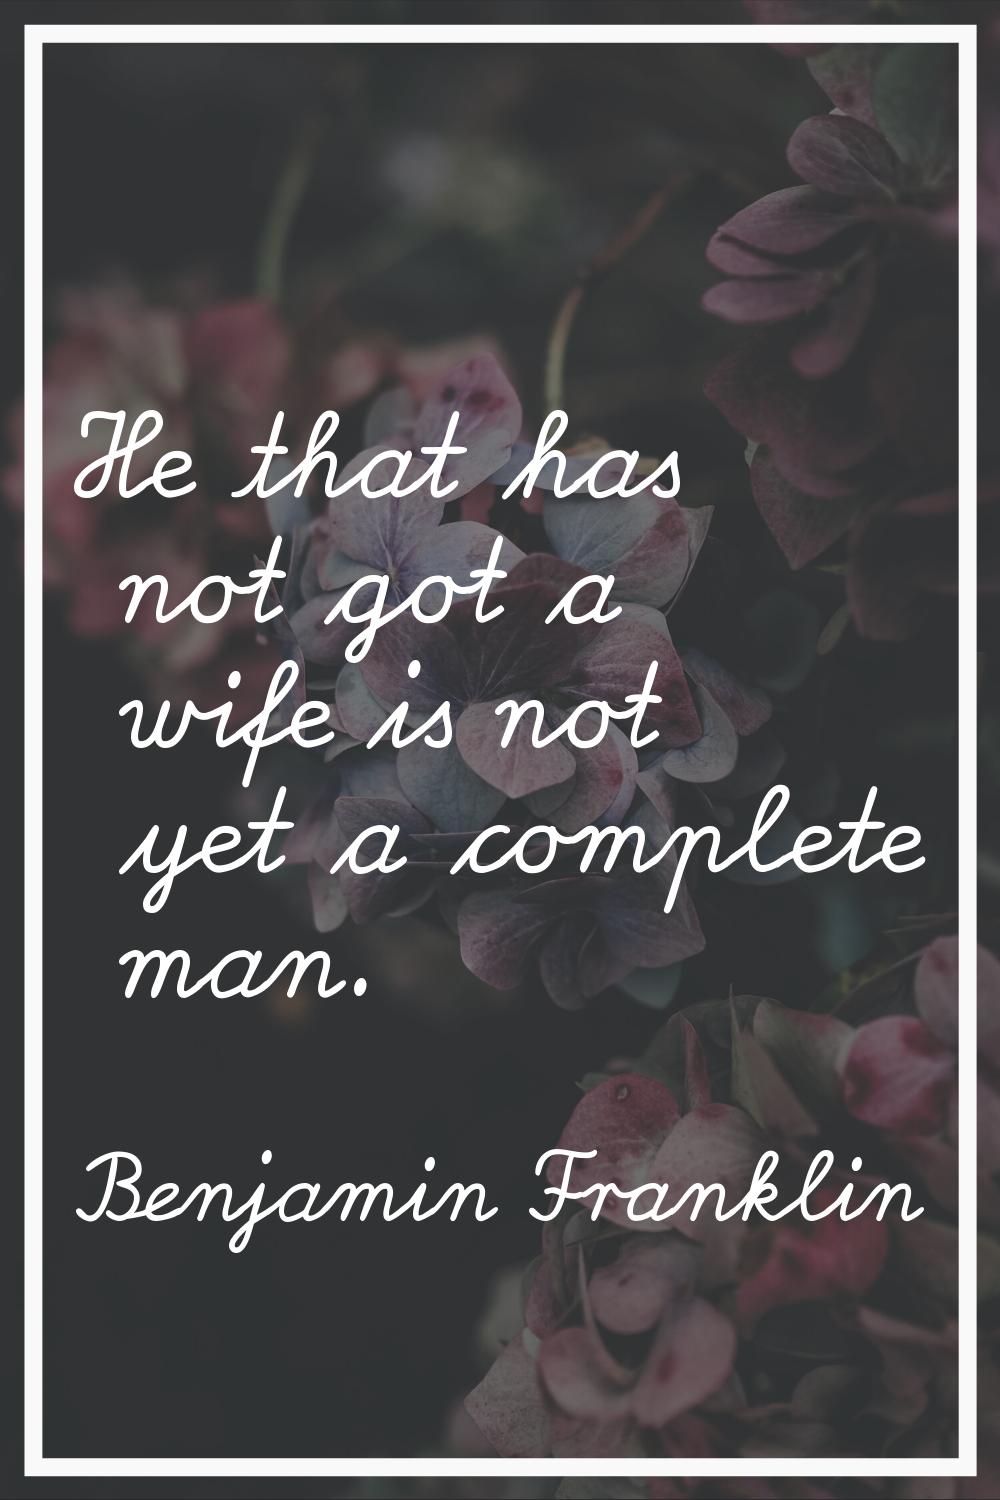 He that has not got a wife is not yet a complete man.